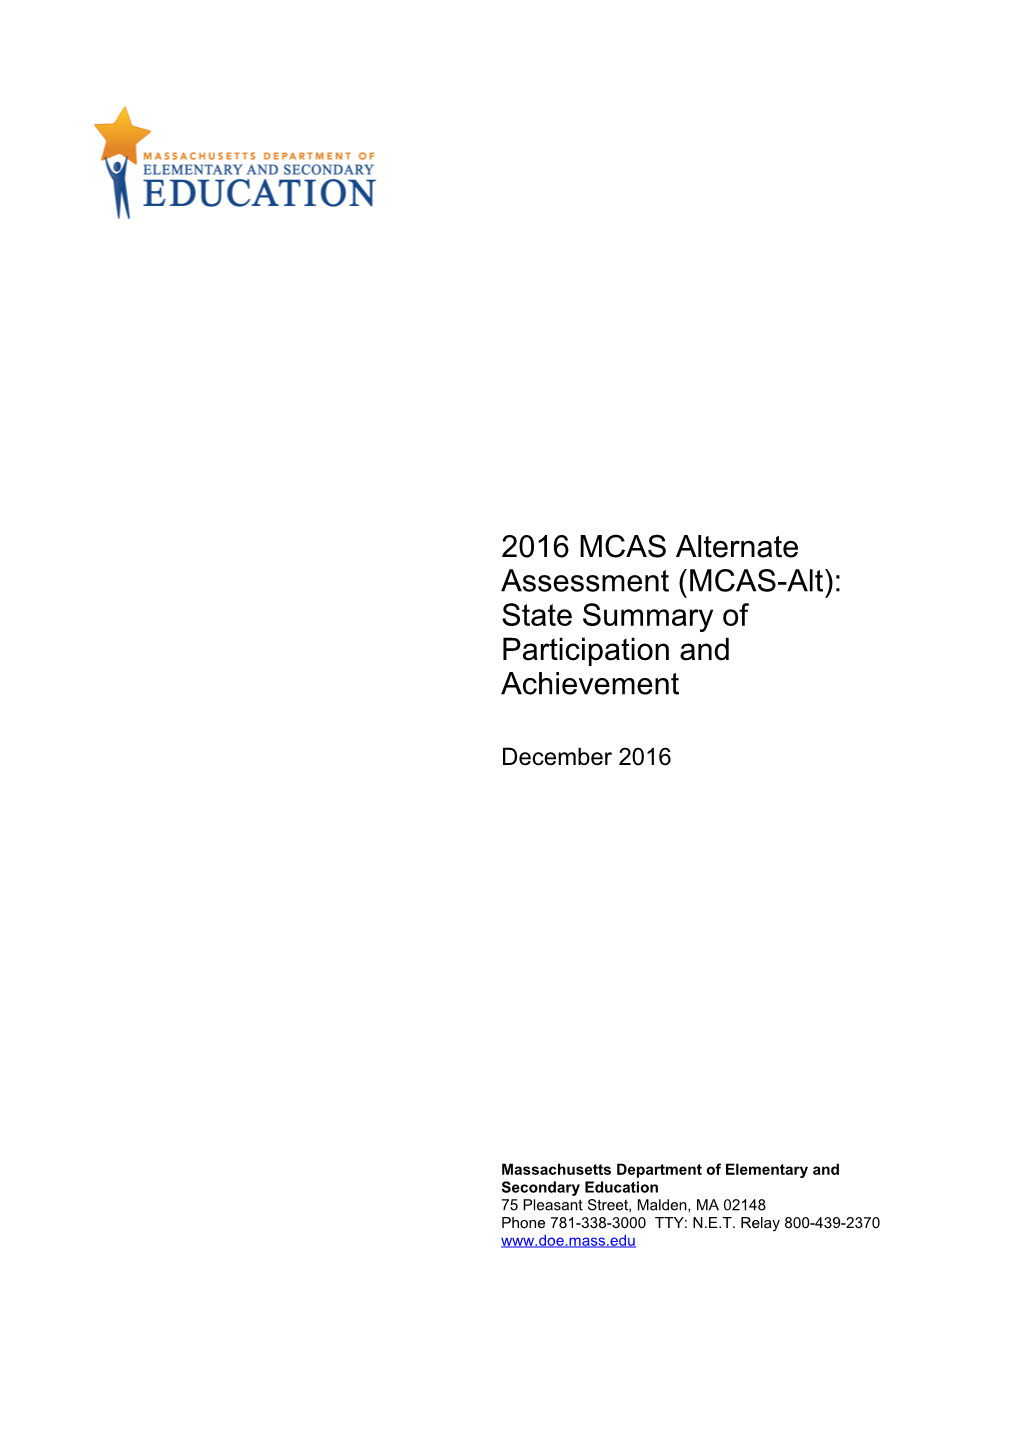 State Summary 2016 MCAS-Alt: Participation and Performance